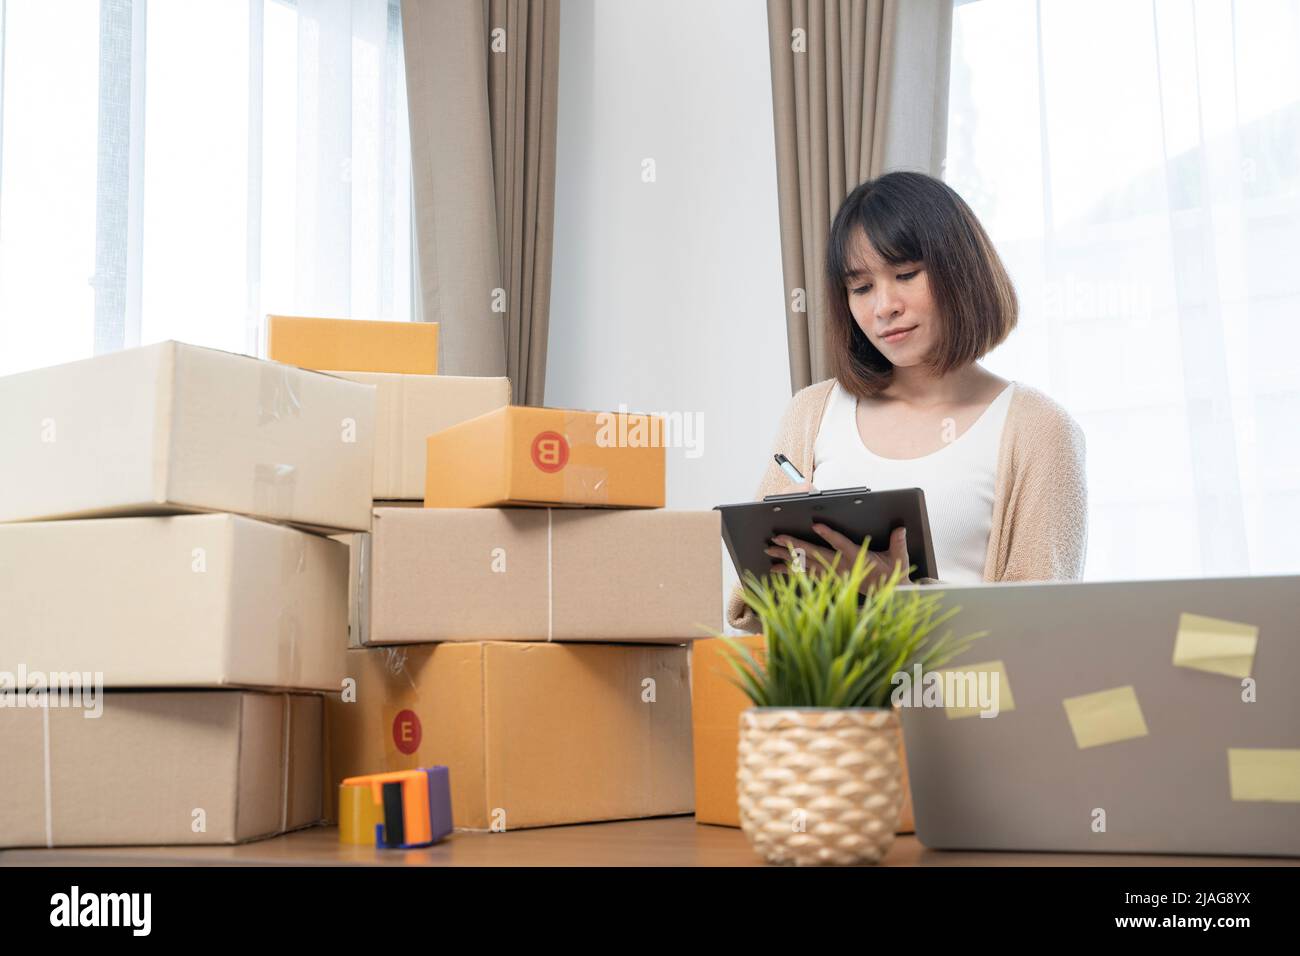 Asian women counting boxes before shipping to customers, work from home, small business owners or small business entrepreneurs just starting out worki Stock Photo